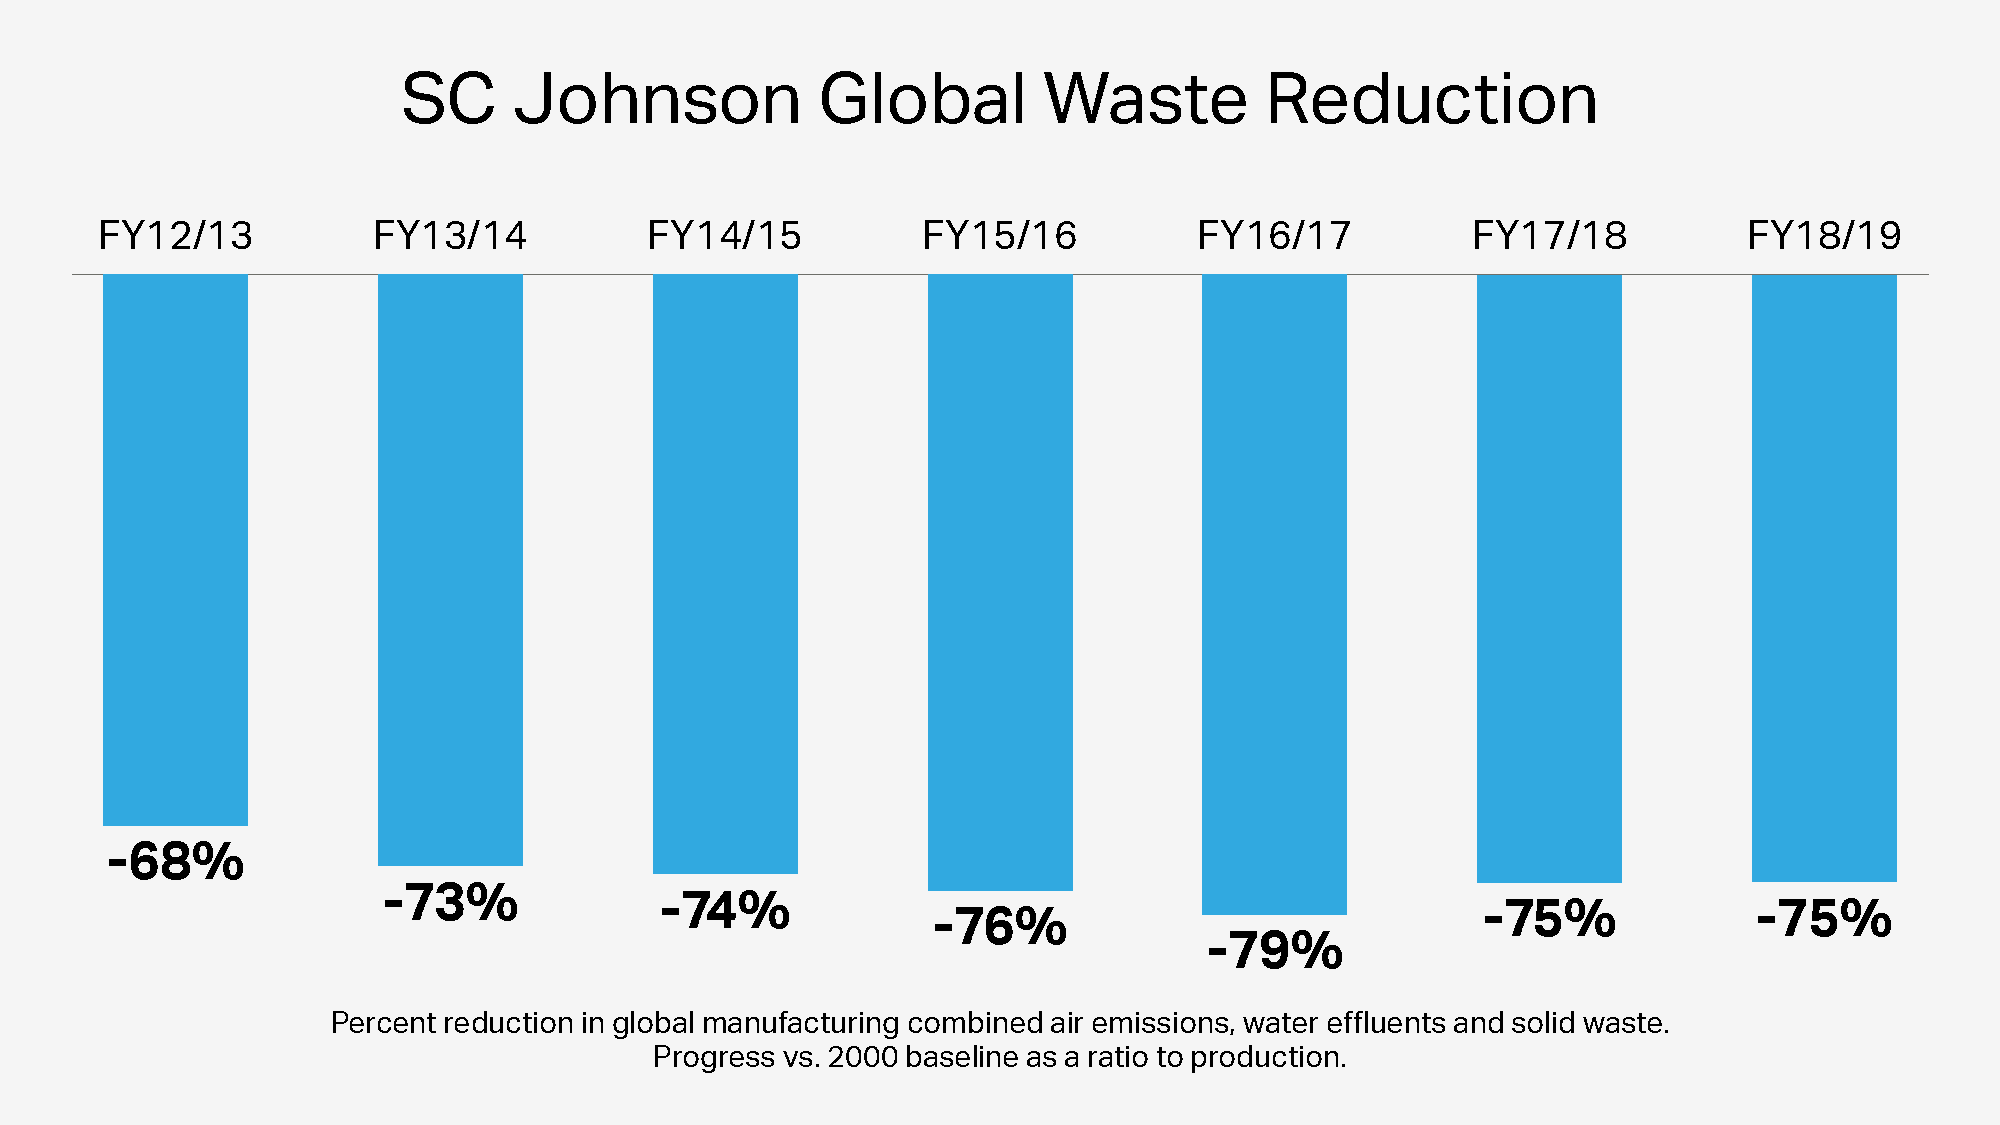 SC Johnson Global Waste Reduction Over the Years